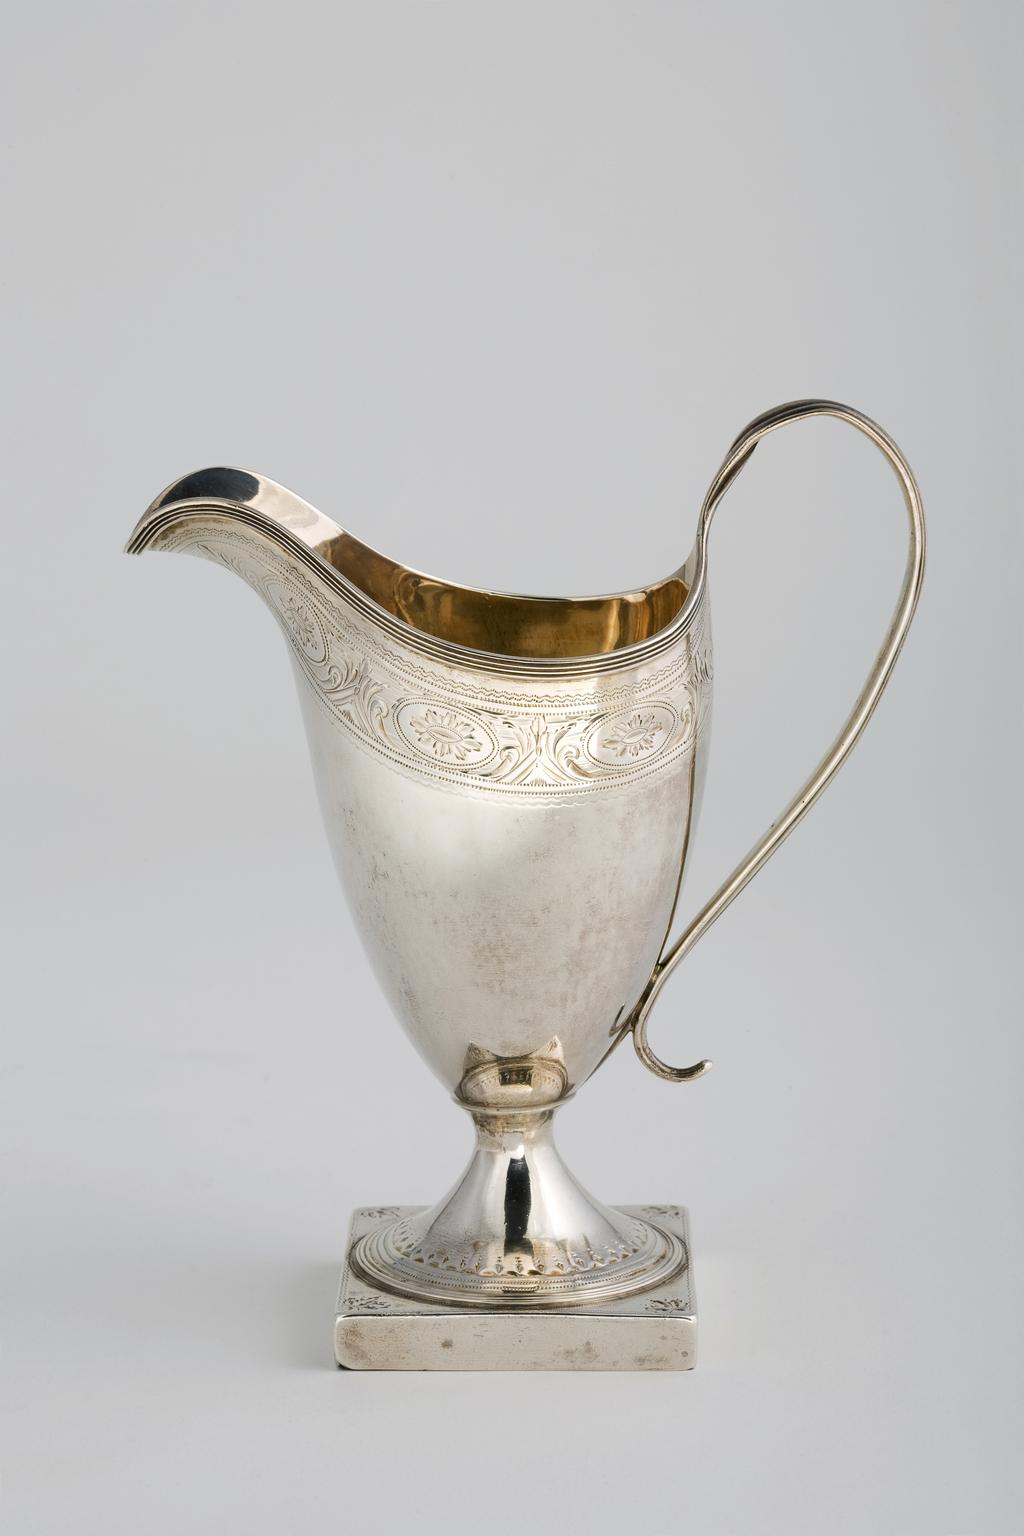 An image of Cream Jug. Bateman, Peter, silversmith, England, London. Bateman, Ann, silversmith, England, London (It is unclear which silversmith(s) are associated with London). Helmet-shaped body standing on a circular pedestal foot on square base; with loop reeded handle, the body with applied reeded rim above a border of bright-cut engraved decoration; the foot with bright-cut and reeded borders. Silver, the body raised, the decoration applied and bright-cut engraved, height, to top of handle, 16 cm, width, from lip to handle, 13.5 cm, weight, whole, 154, g, 1791-1792. Neoclassical.